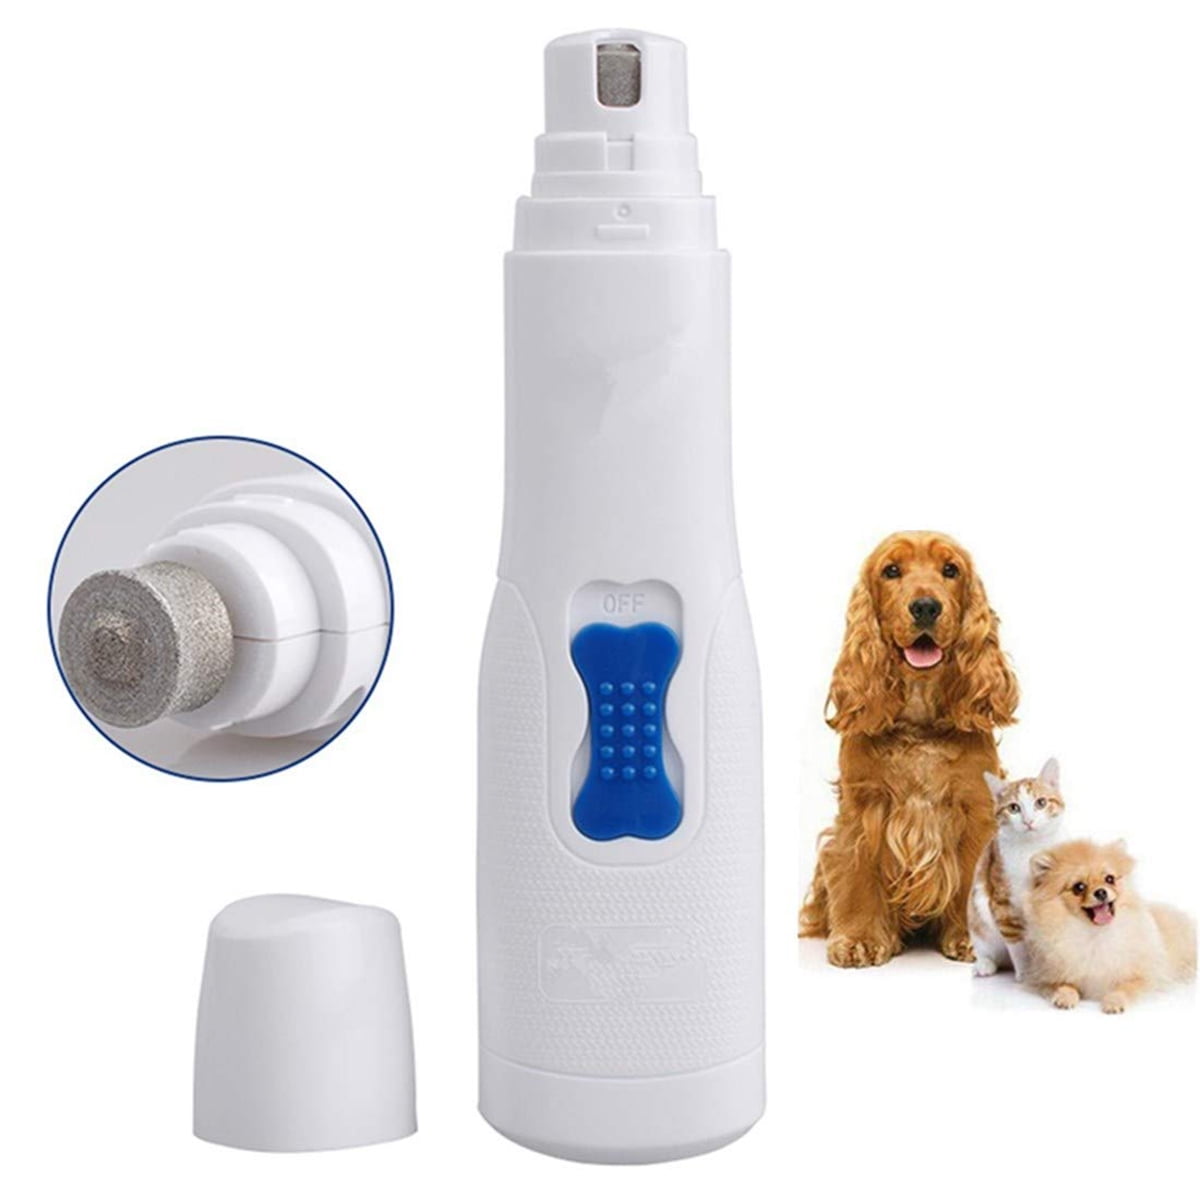 Dog Nail Grinder Quiet Professional Pet Trimmers Electric Clippers Painless Paws File Grooming Smoothing Large Medium Small Dogs Cats 578aa533 20f1 42b0 a5d0 8197d840fbf8 1.ab97931a10d8427af235c7c7e2fa84b8